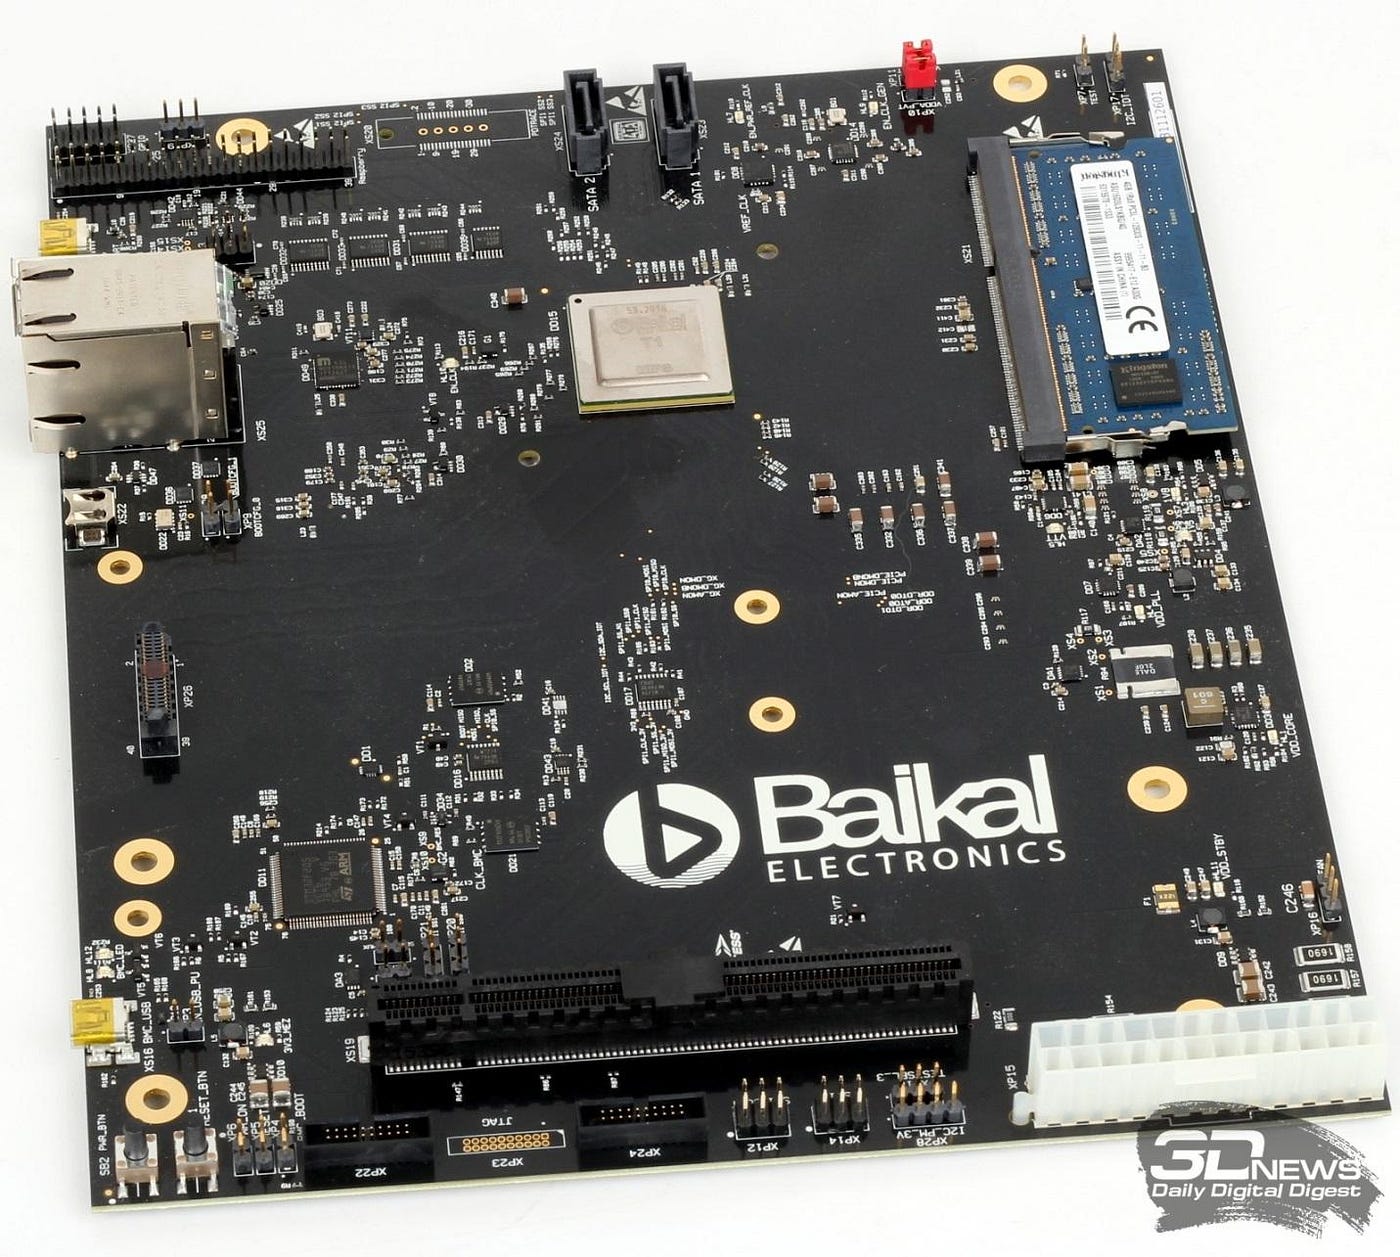 First Independent Tests of Baikal-T1 Processor and BFK 3.1